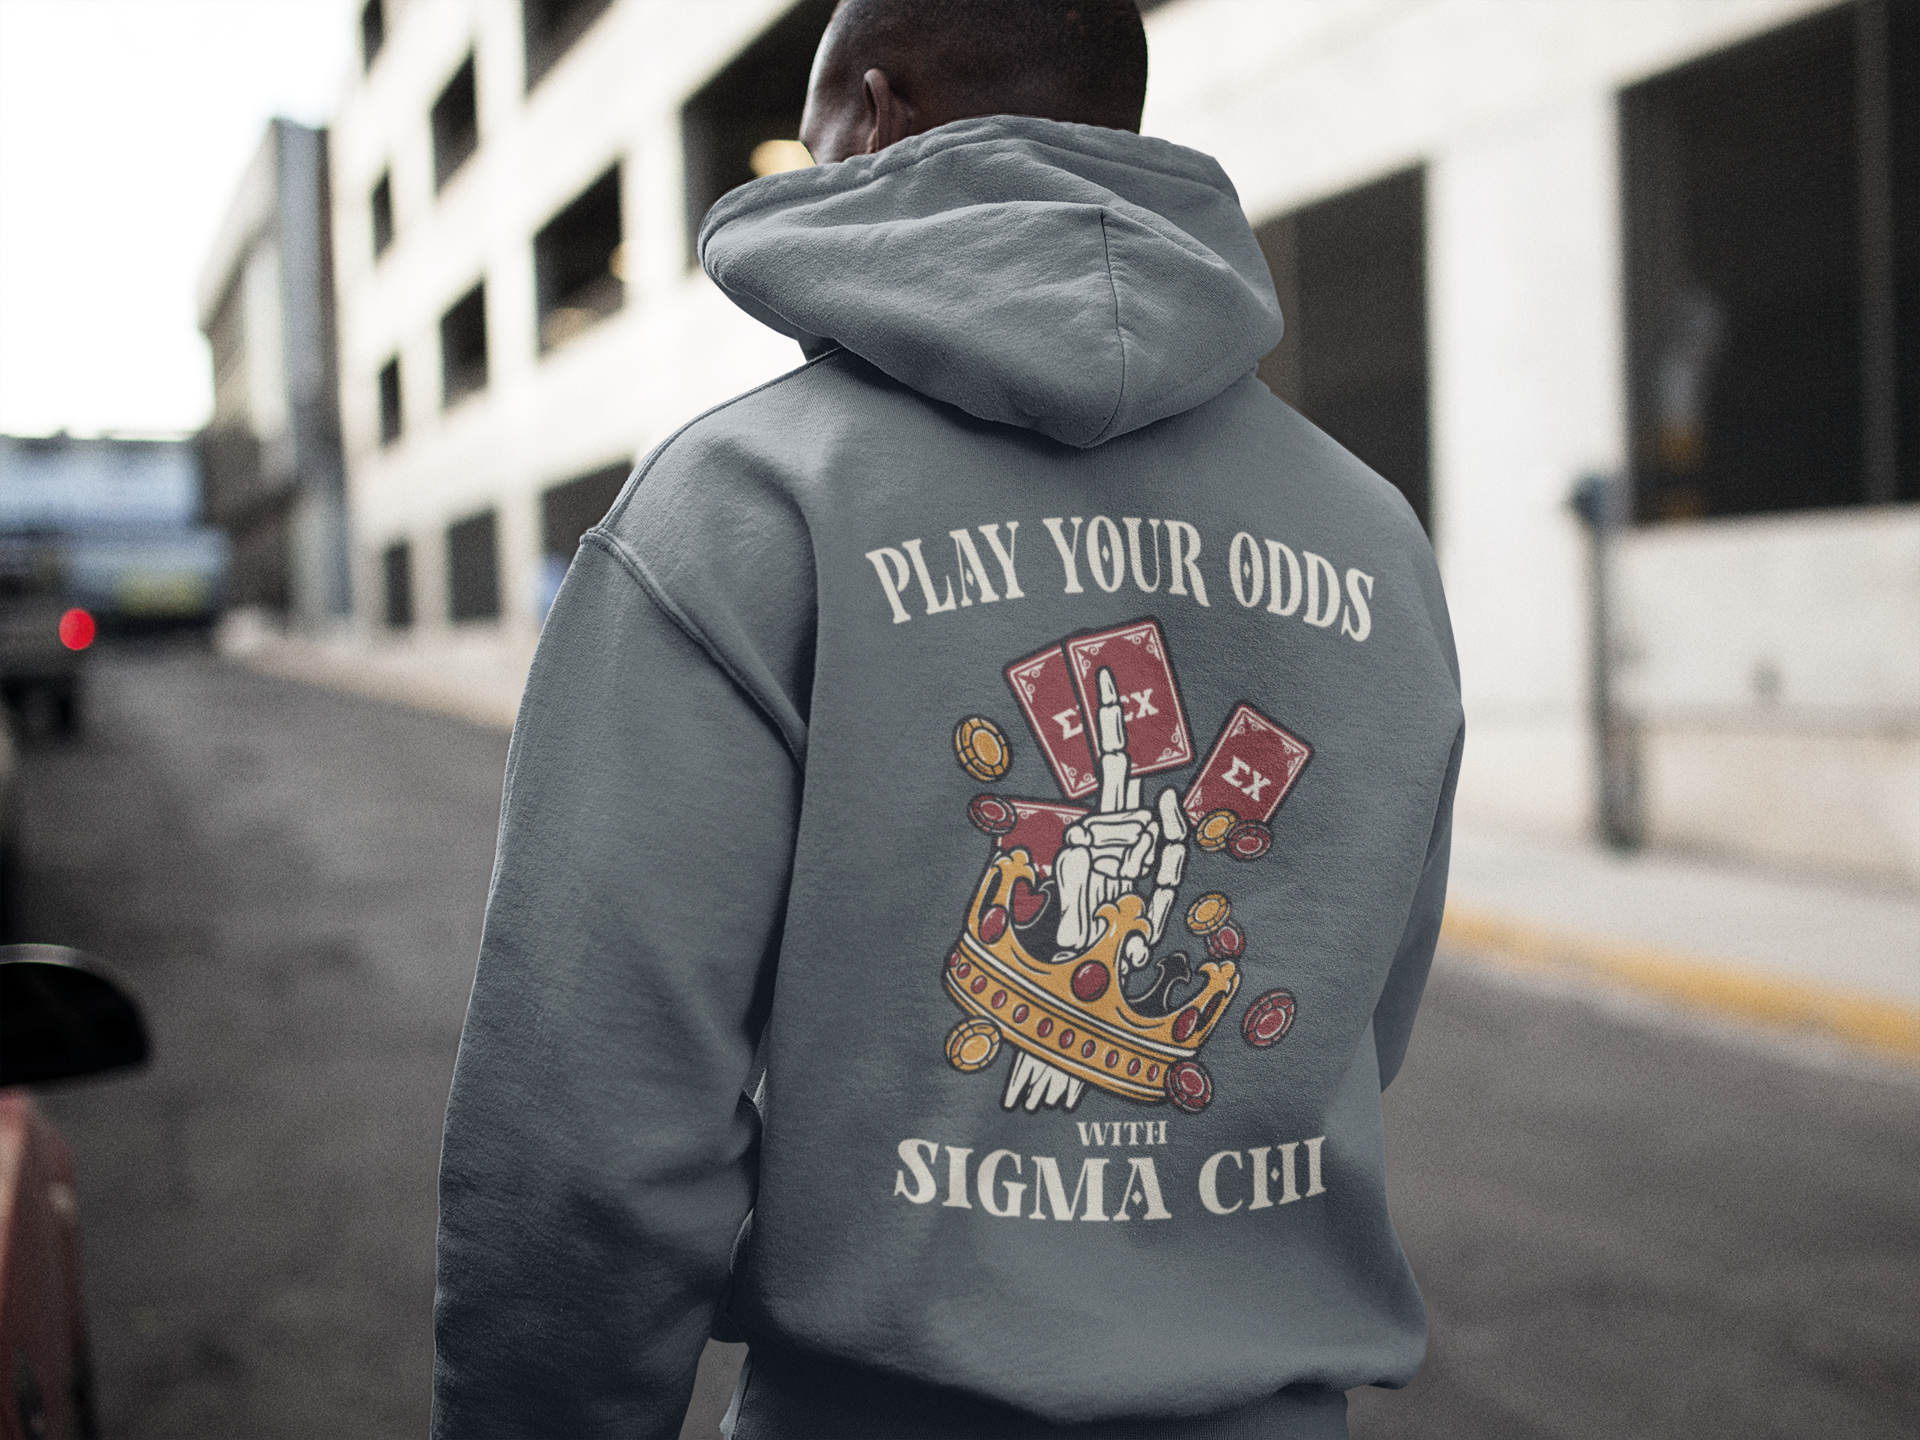 Sigma Chi Graphic Hoodie | Play Your Odds | Sigma Chi Fraternity Merch House model 